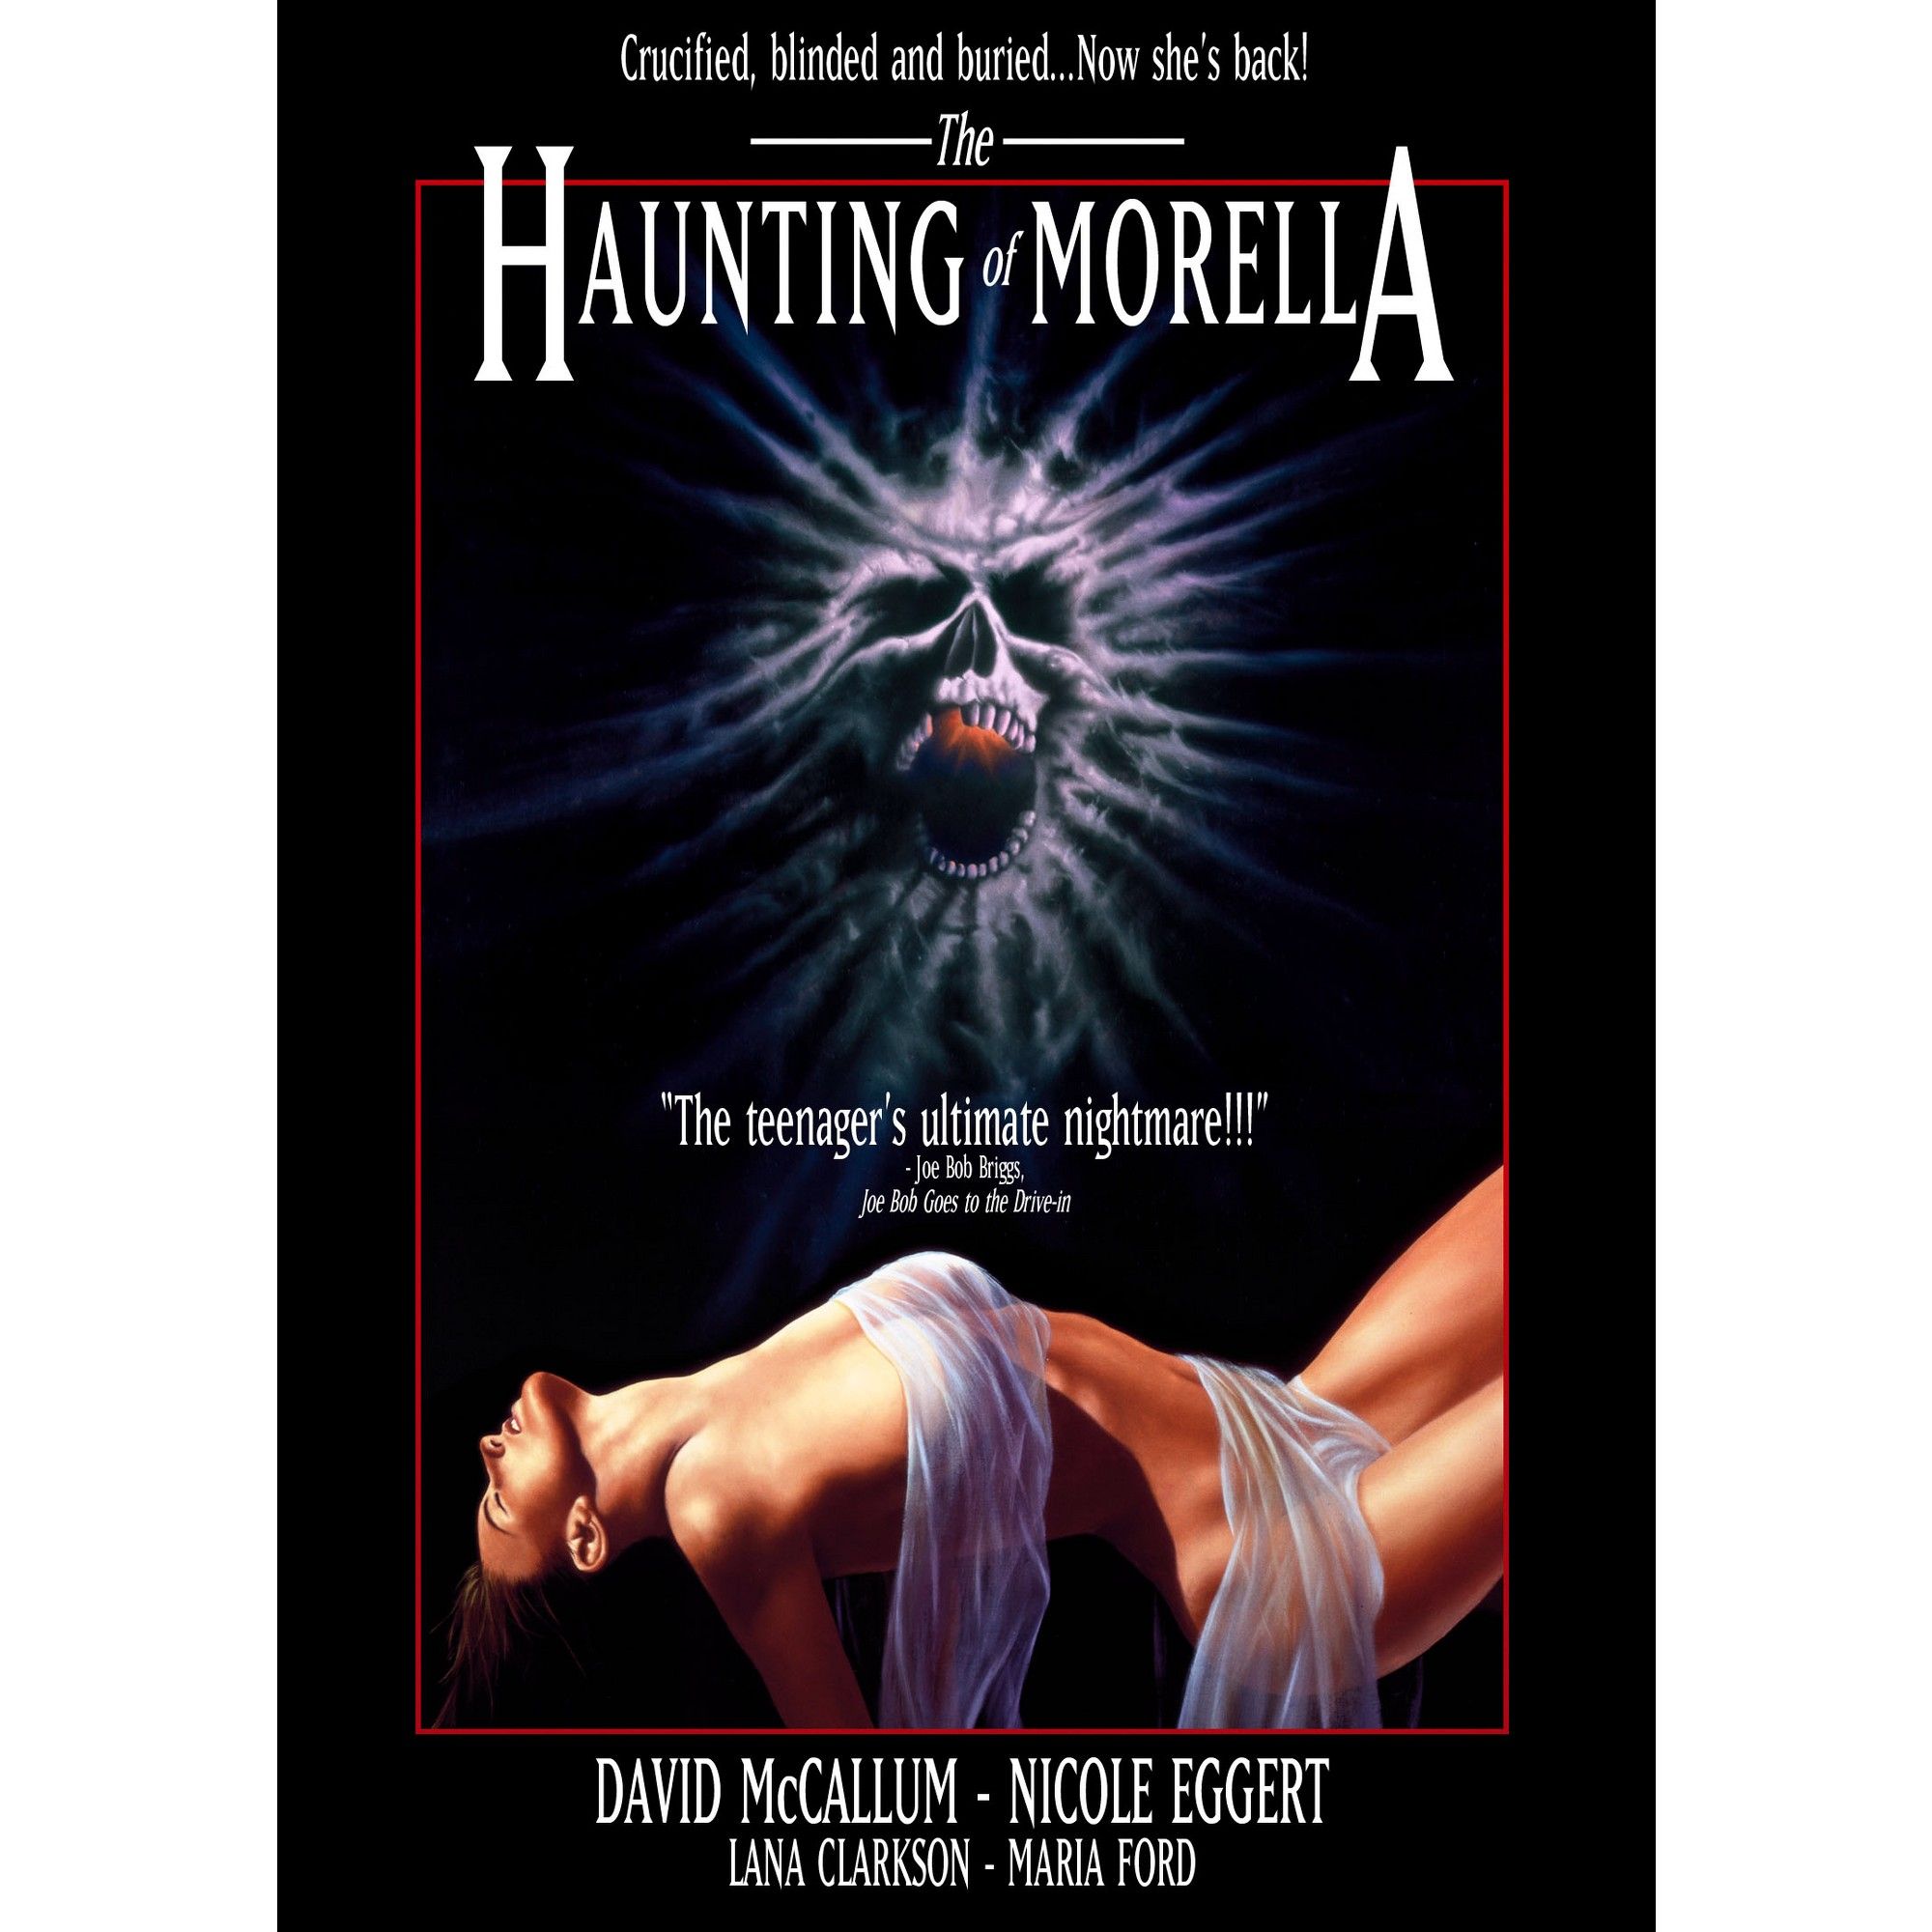 Haunting of morella (Dvd) | Products